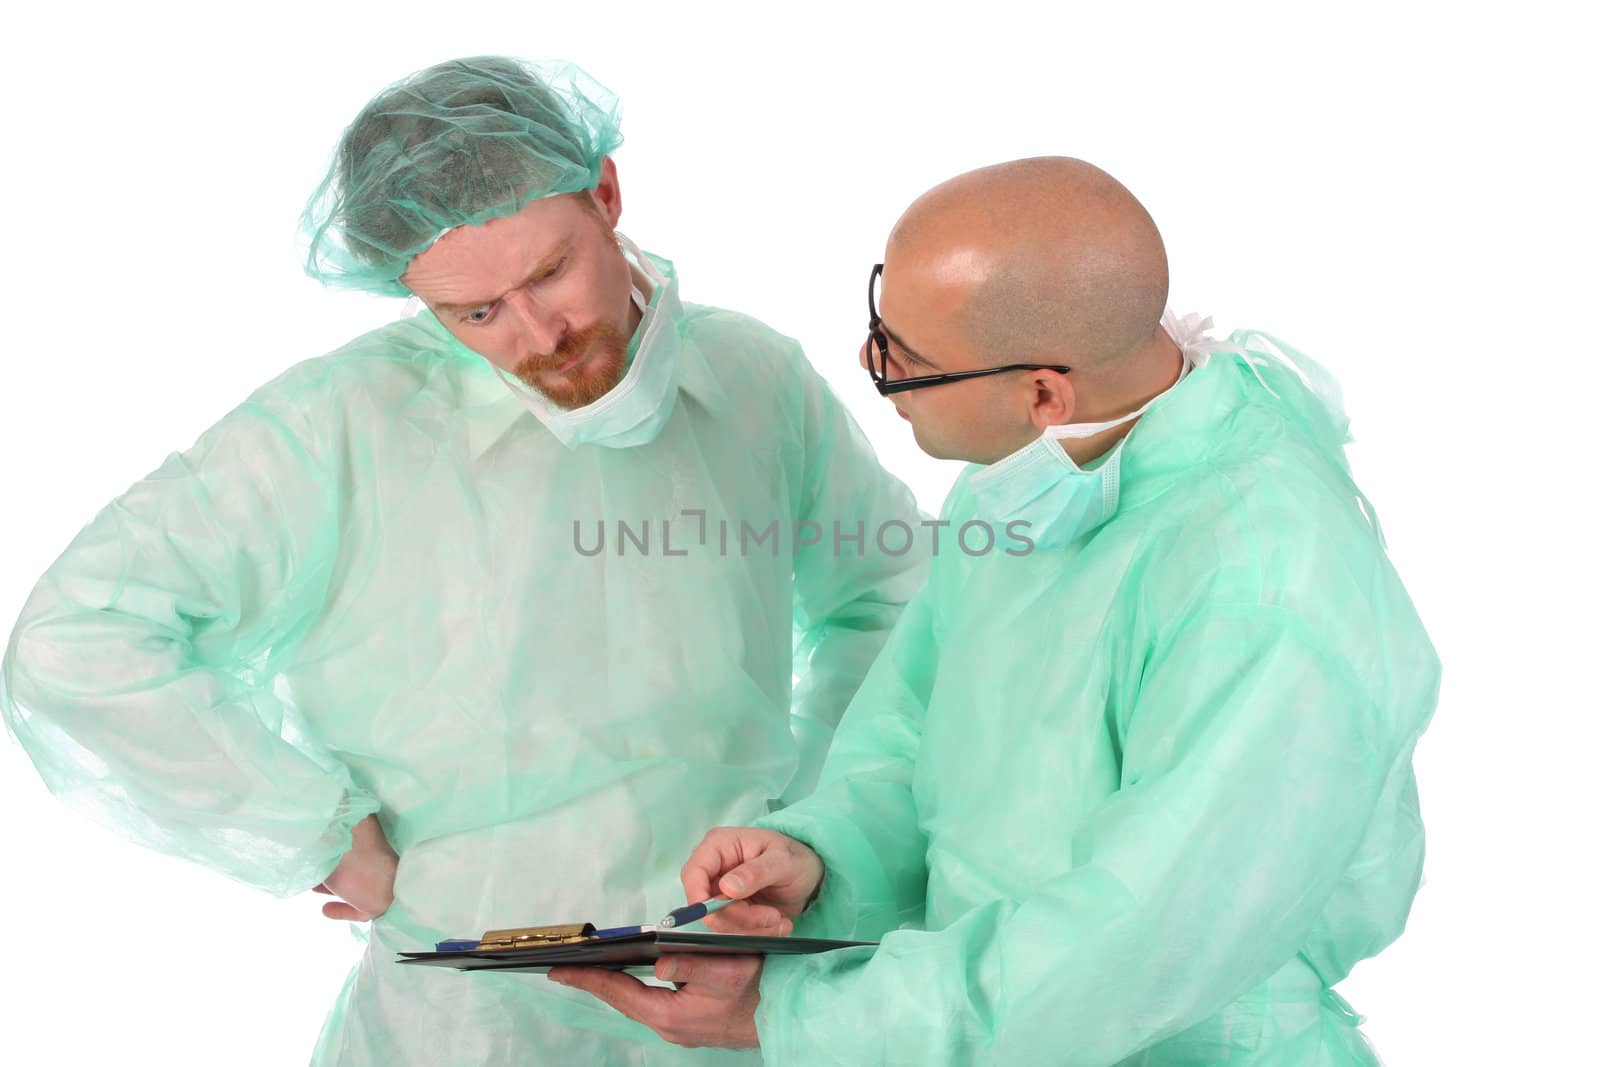 Details two surgeon with documents and pencil